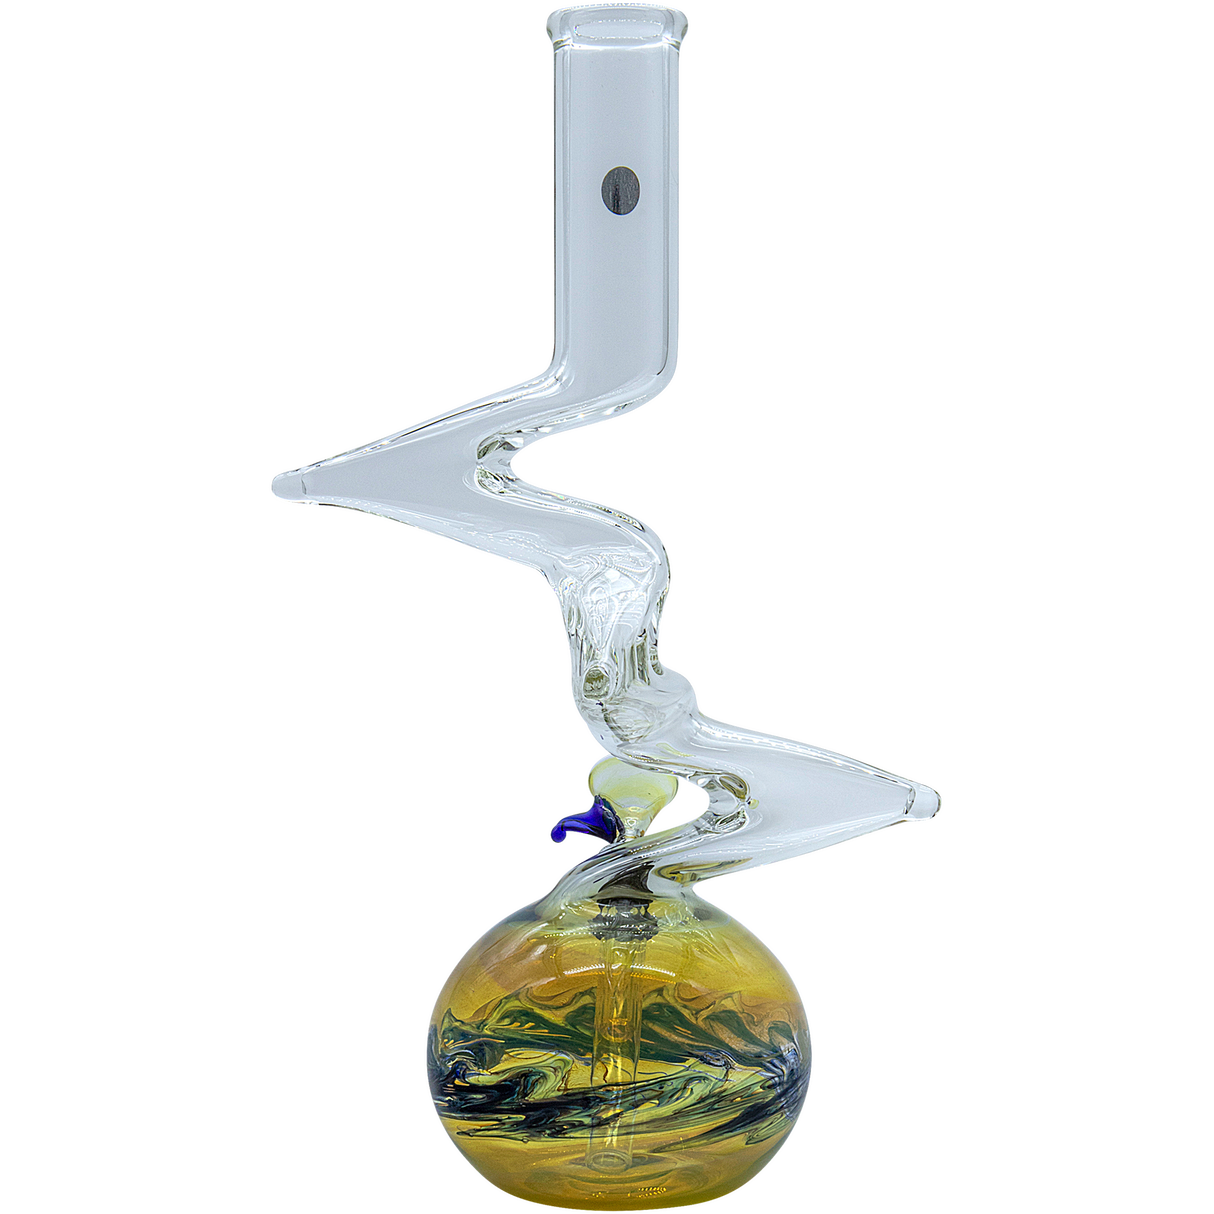 LA Pipes "Switchback" Bubble Base Bong with unique Zong design, 12" height, made in USA